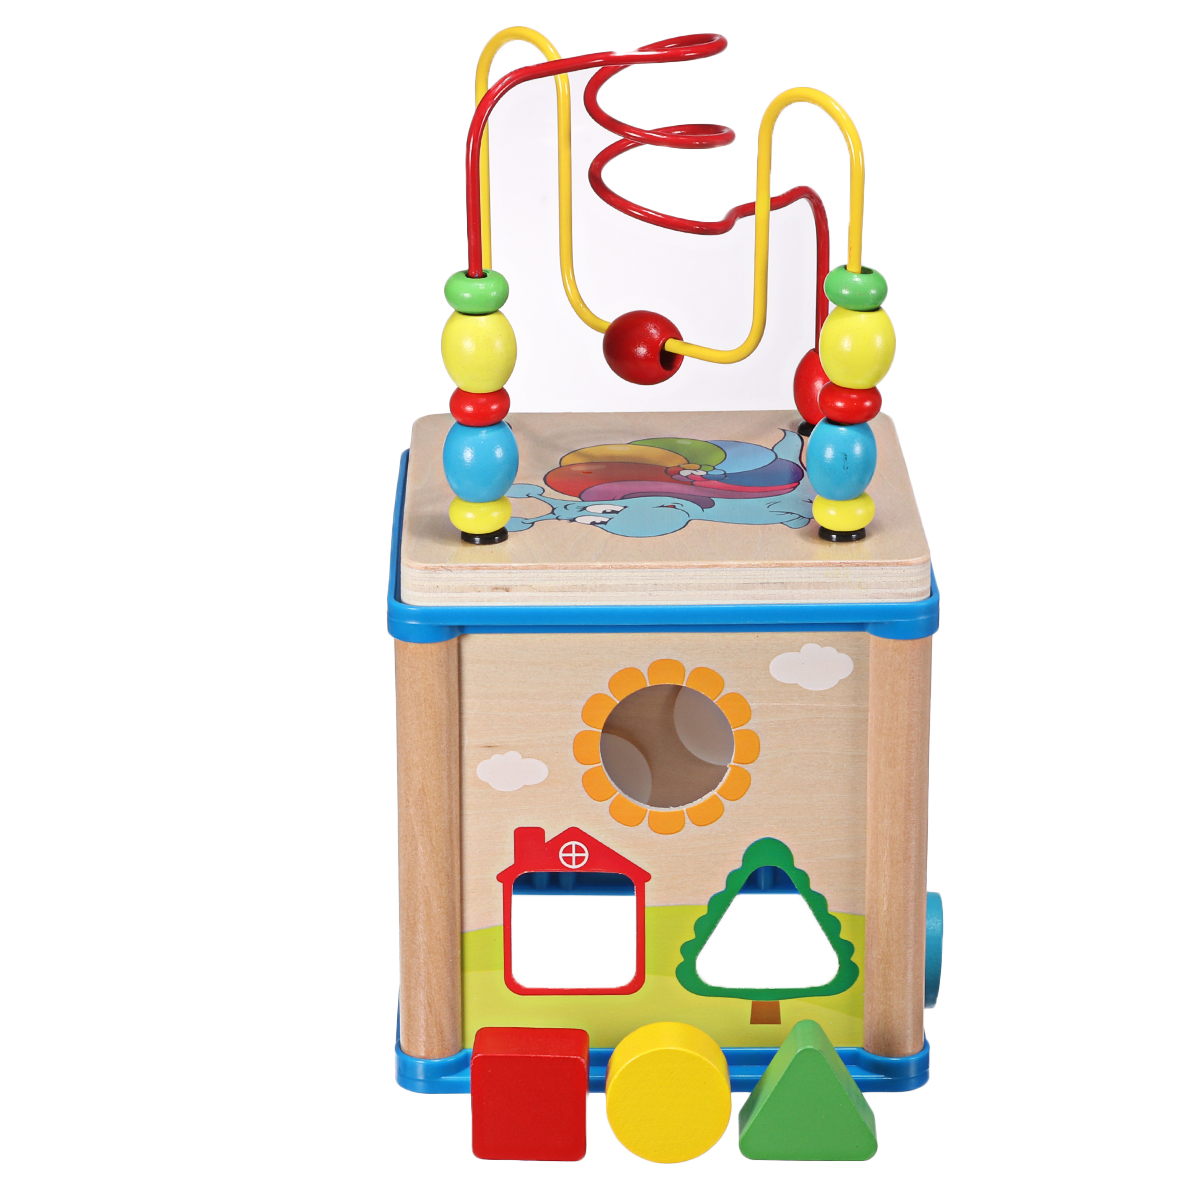 Wooden-Multi-functional-Wisdom-Aroind-Treasure-Box-with-Beads-Parent-child-Educational-Learning-Toy--1733559-5